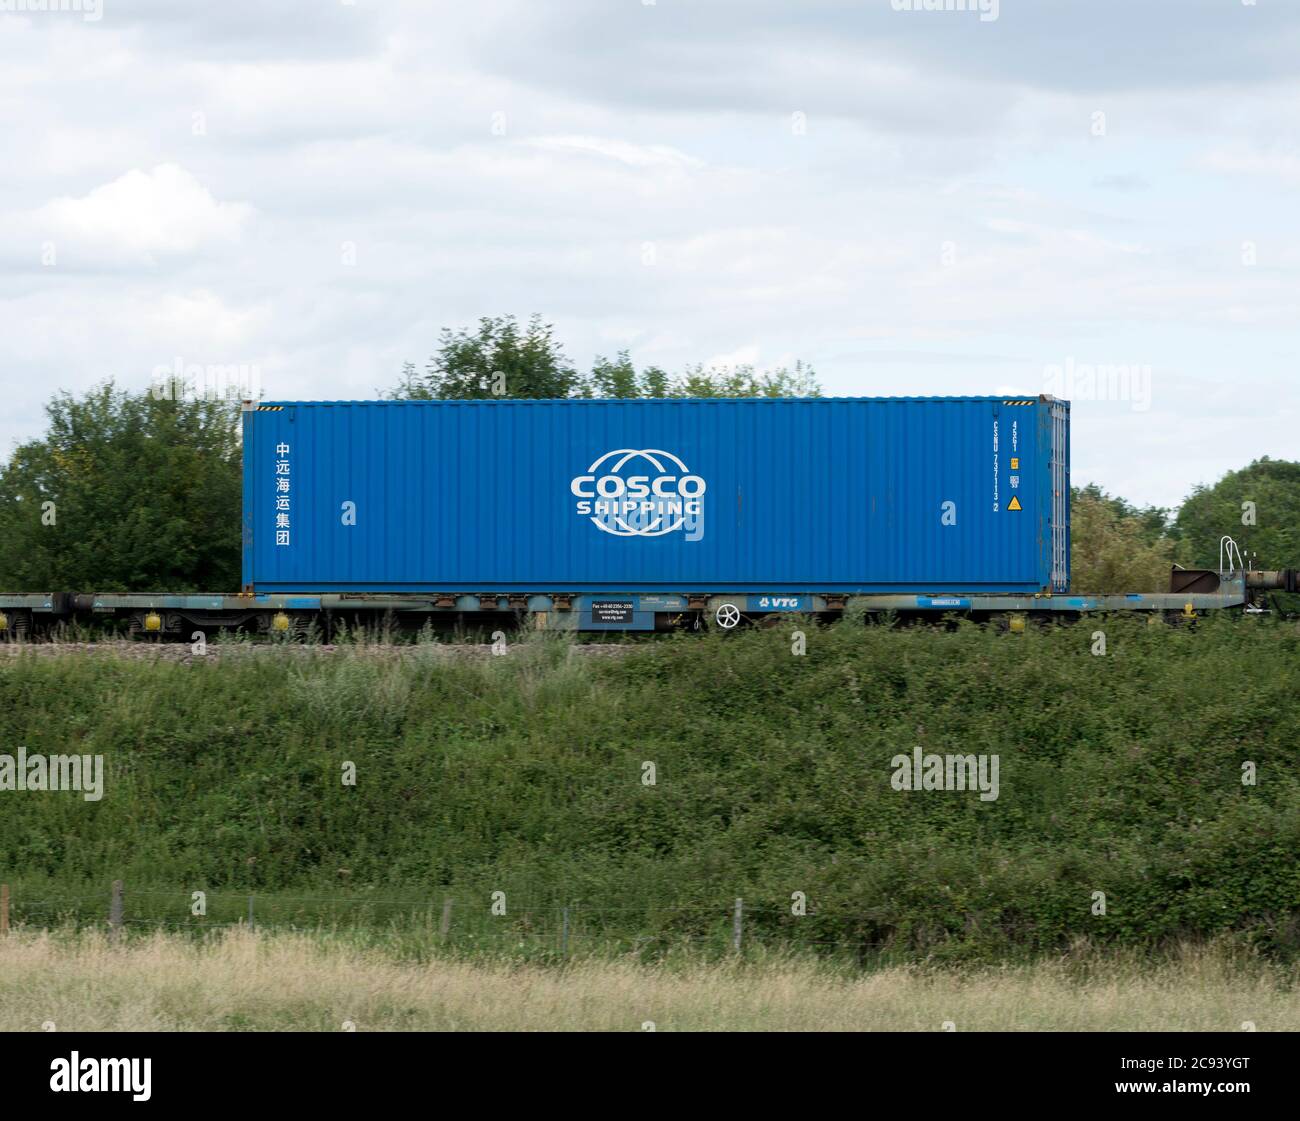 Cosco Shipping container on a freightliner train, Warwickshire, UK Stock Photo